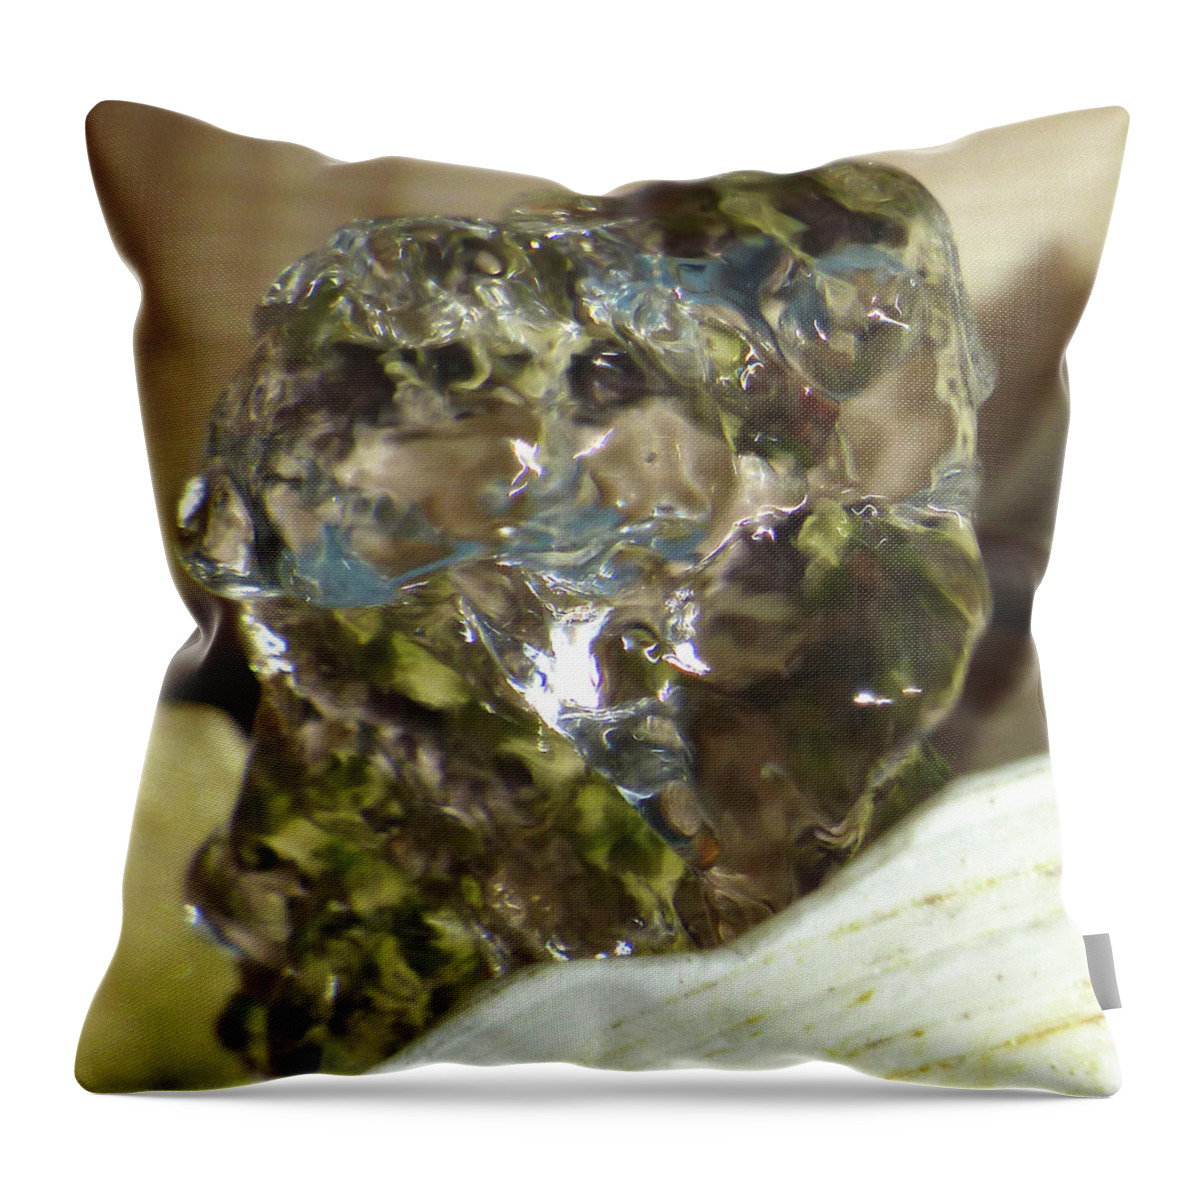 Abstracts Throw Pillow featuring the photograph Ladies Bathing by Amelia Racca